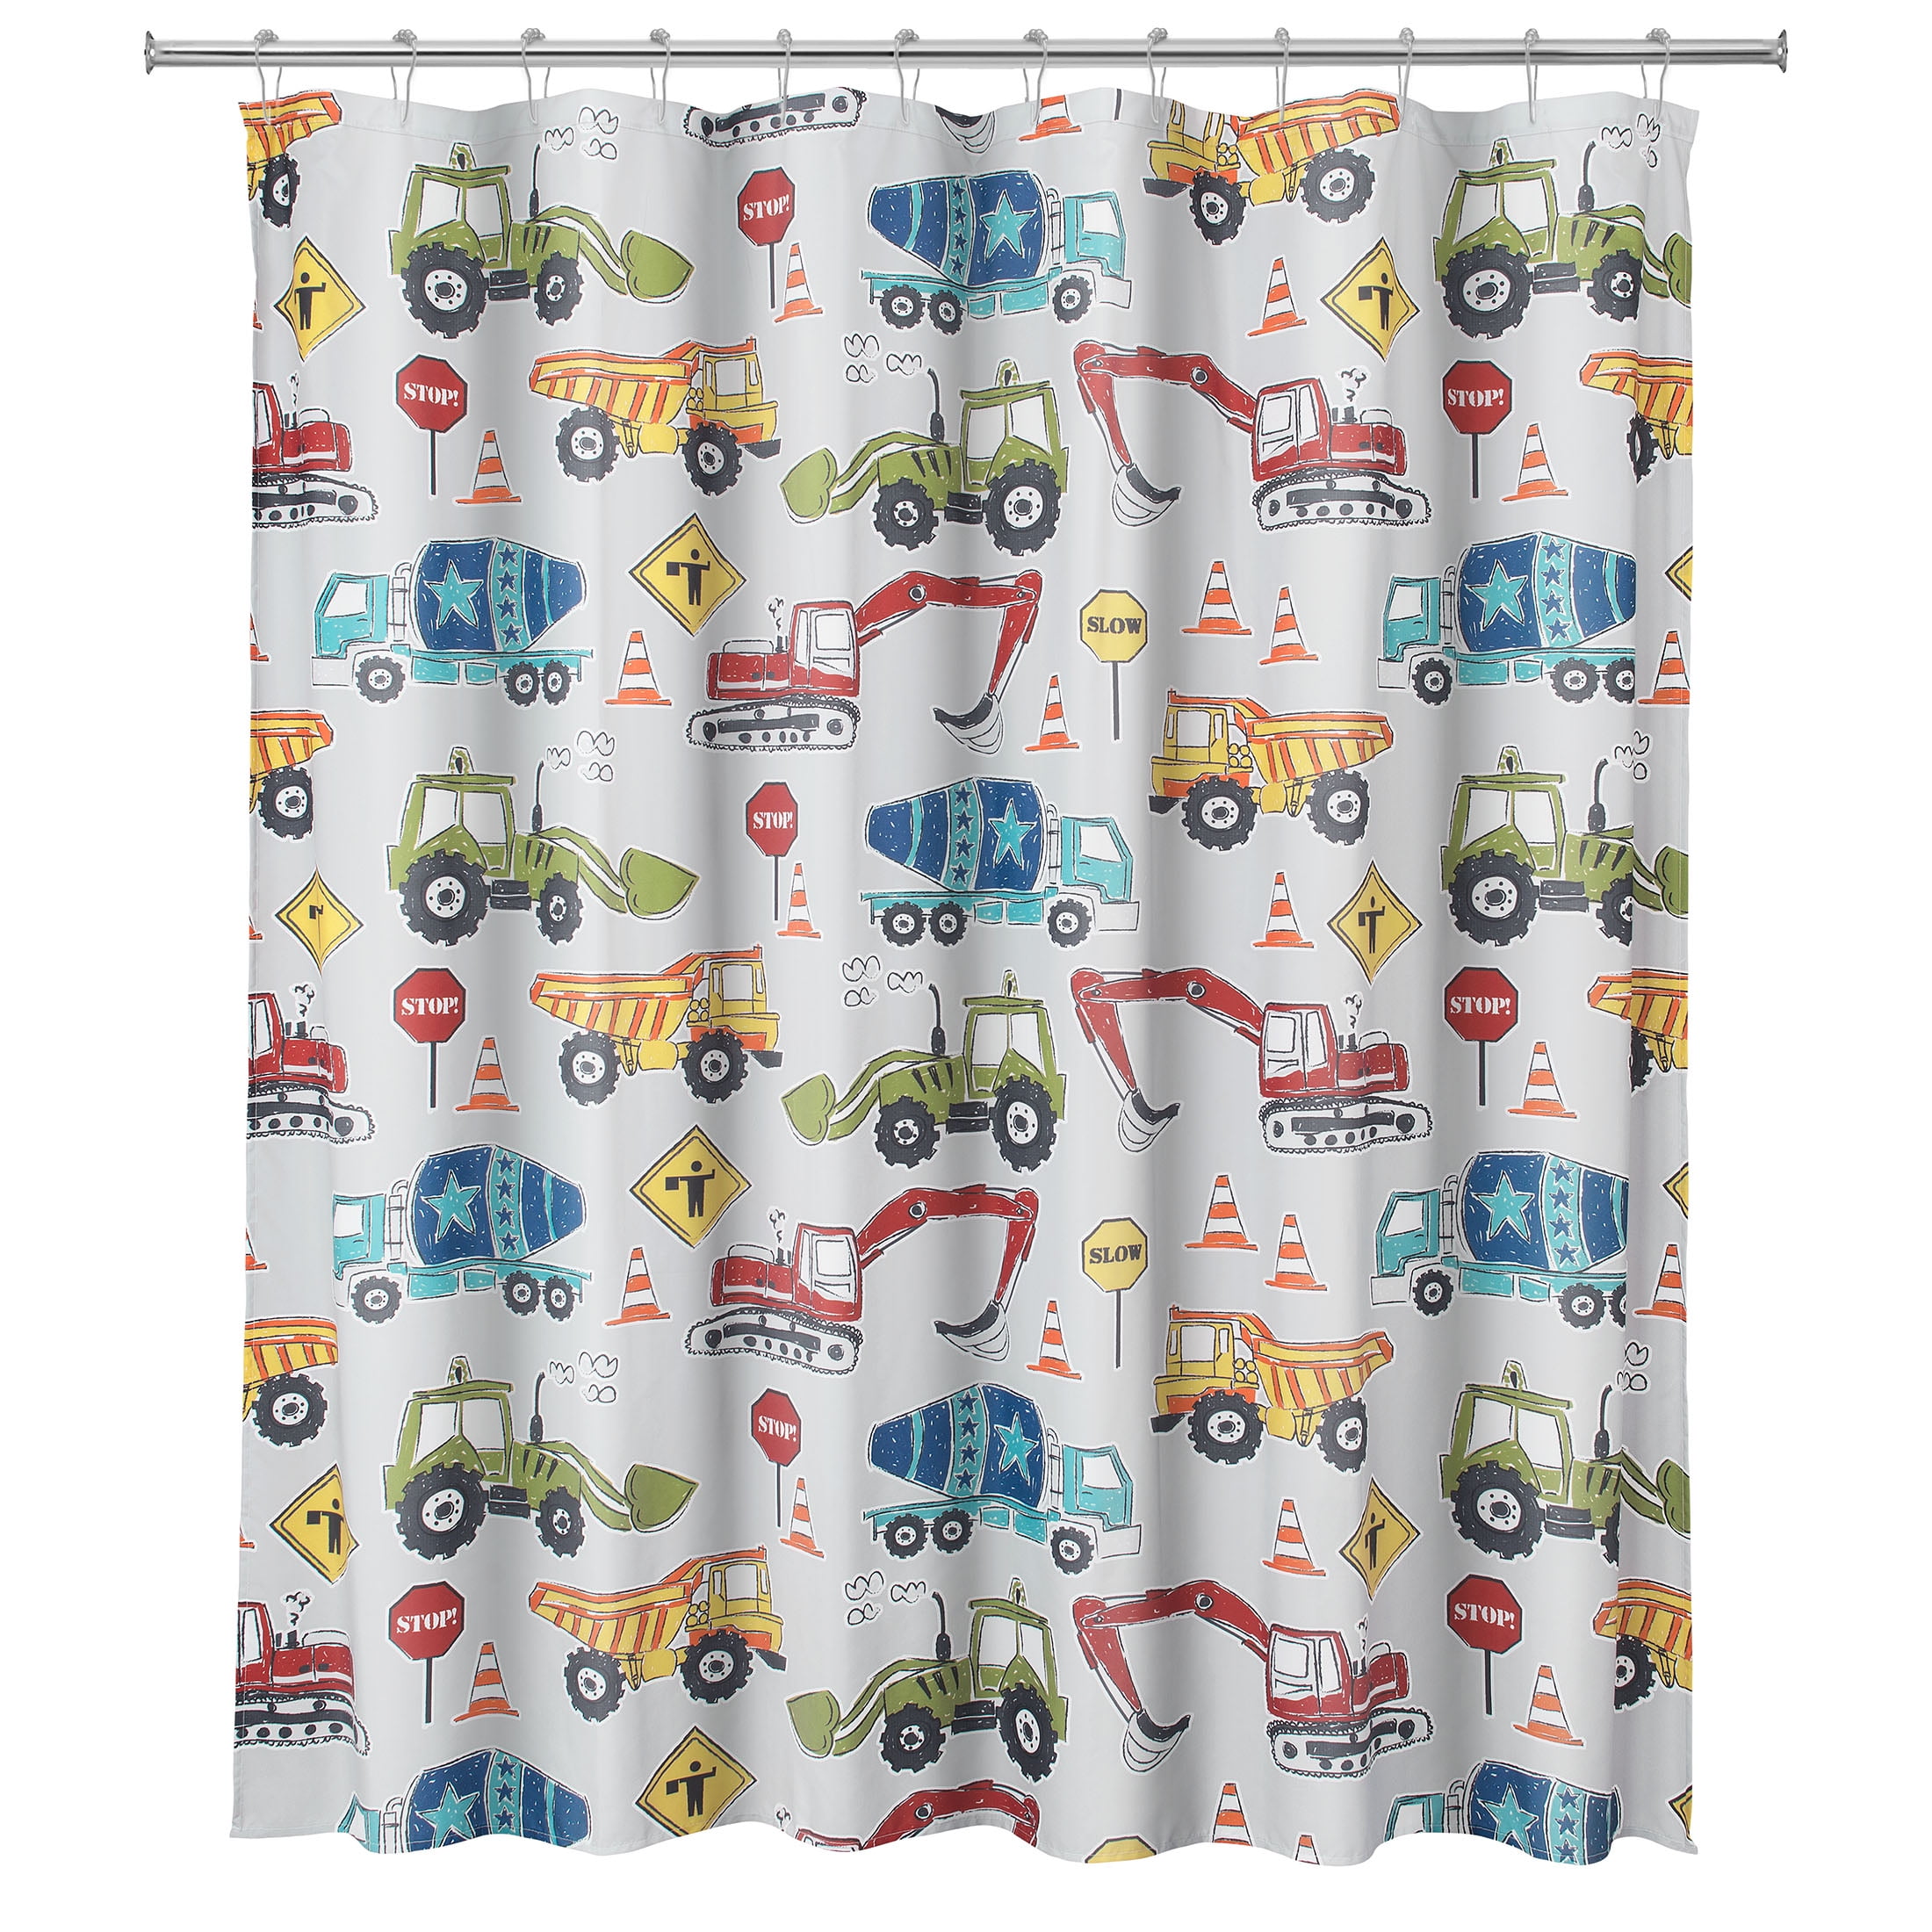 Your Zone Colorful Novelty Construction Polyester Microfiber Shower Curtain, 72 in x 72 in